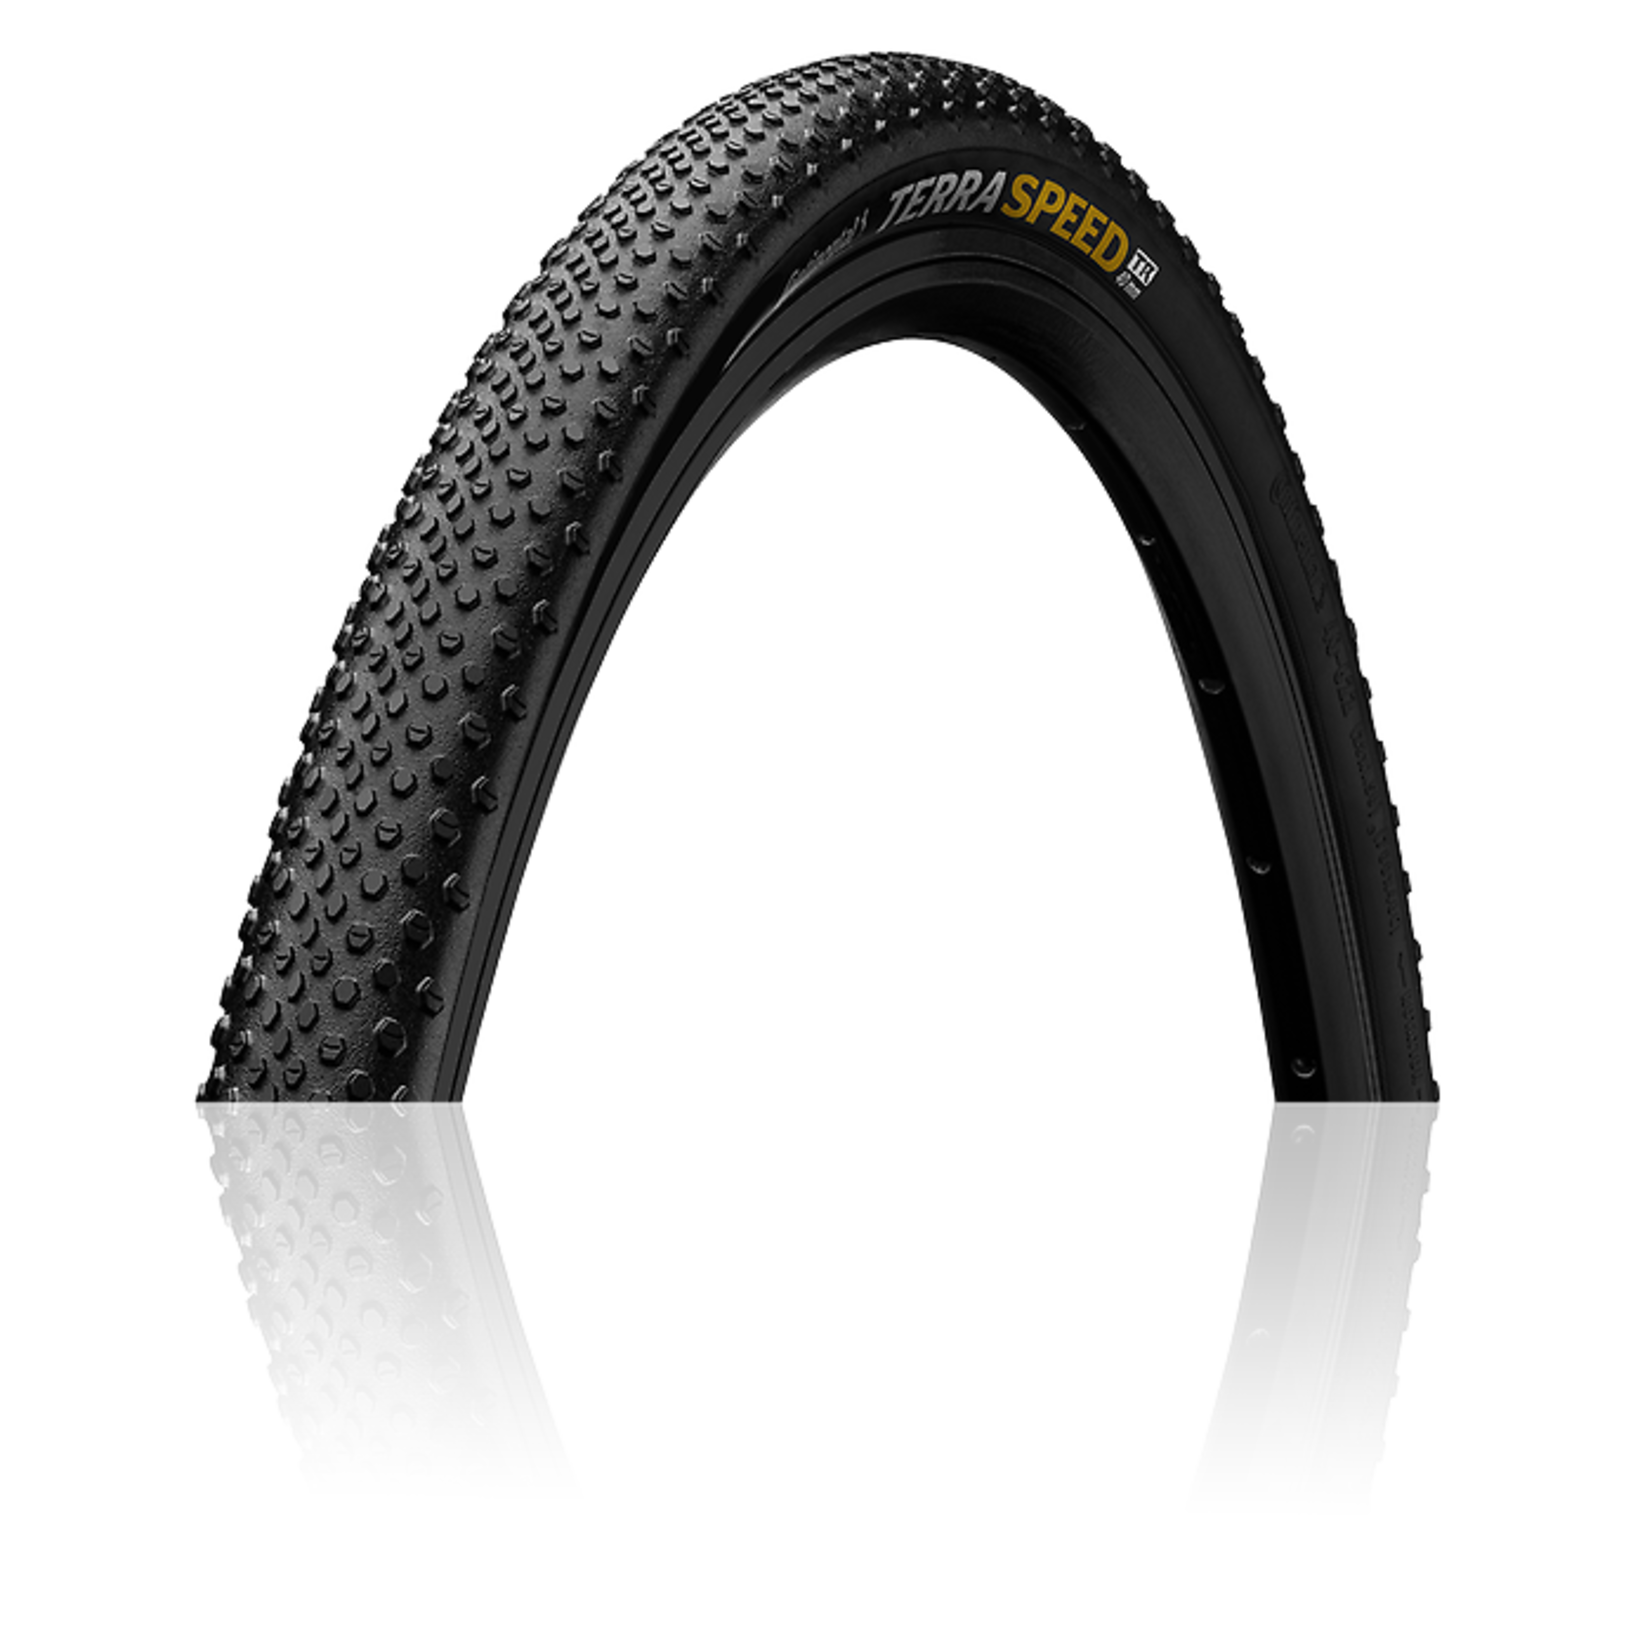 Continental Gravel & CX Tires Terra Speed 700 x 40 Coffee Sidewall Folding ProTection TR + Black Chili